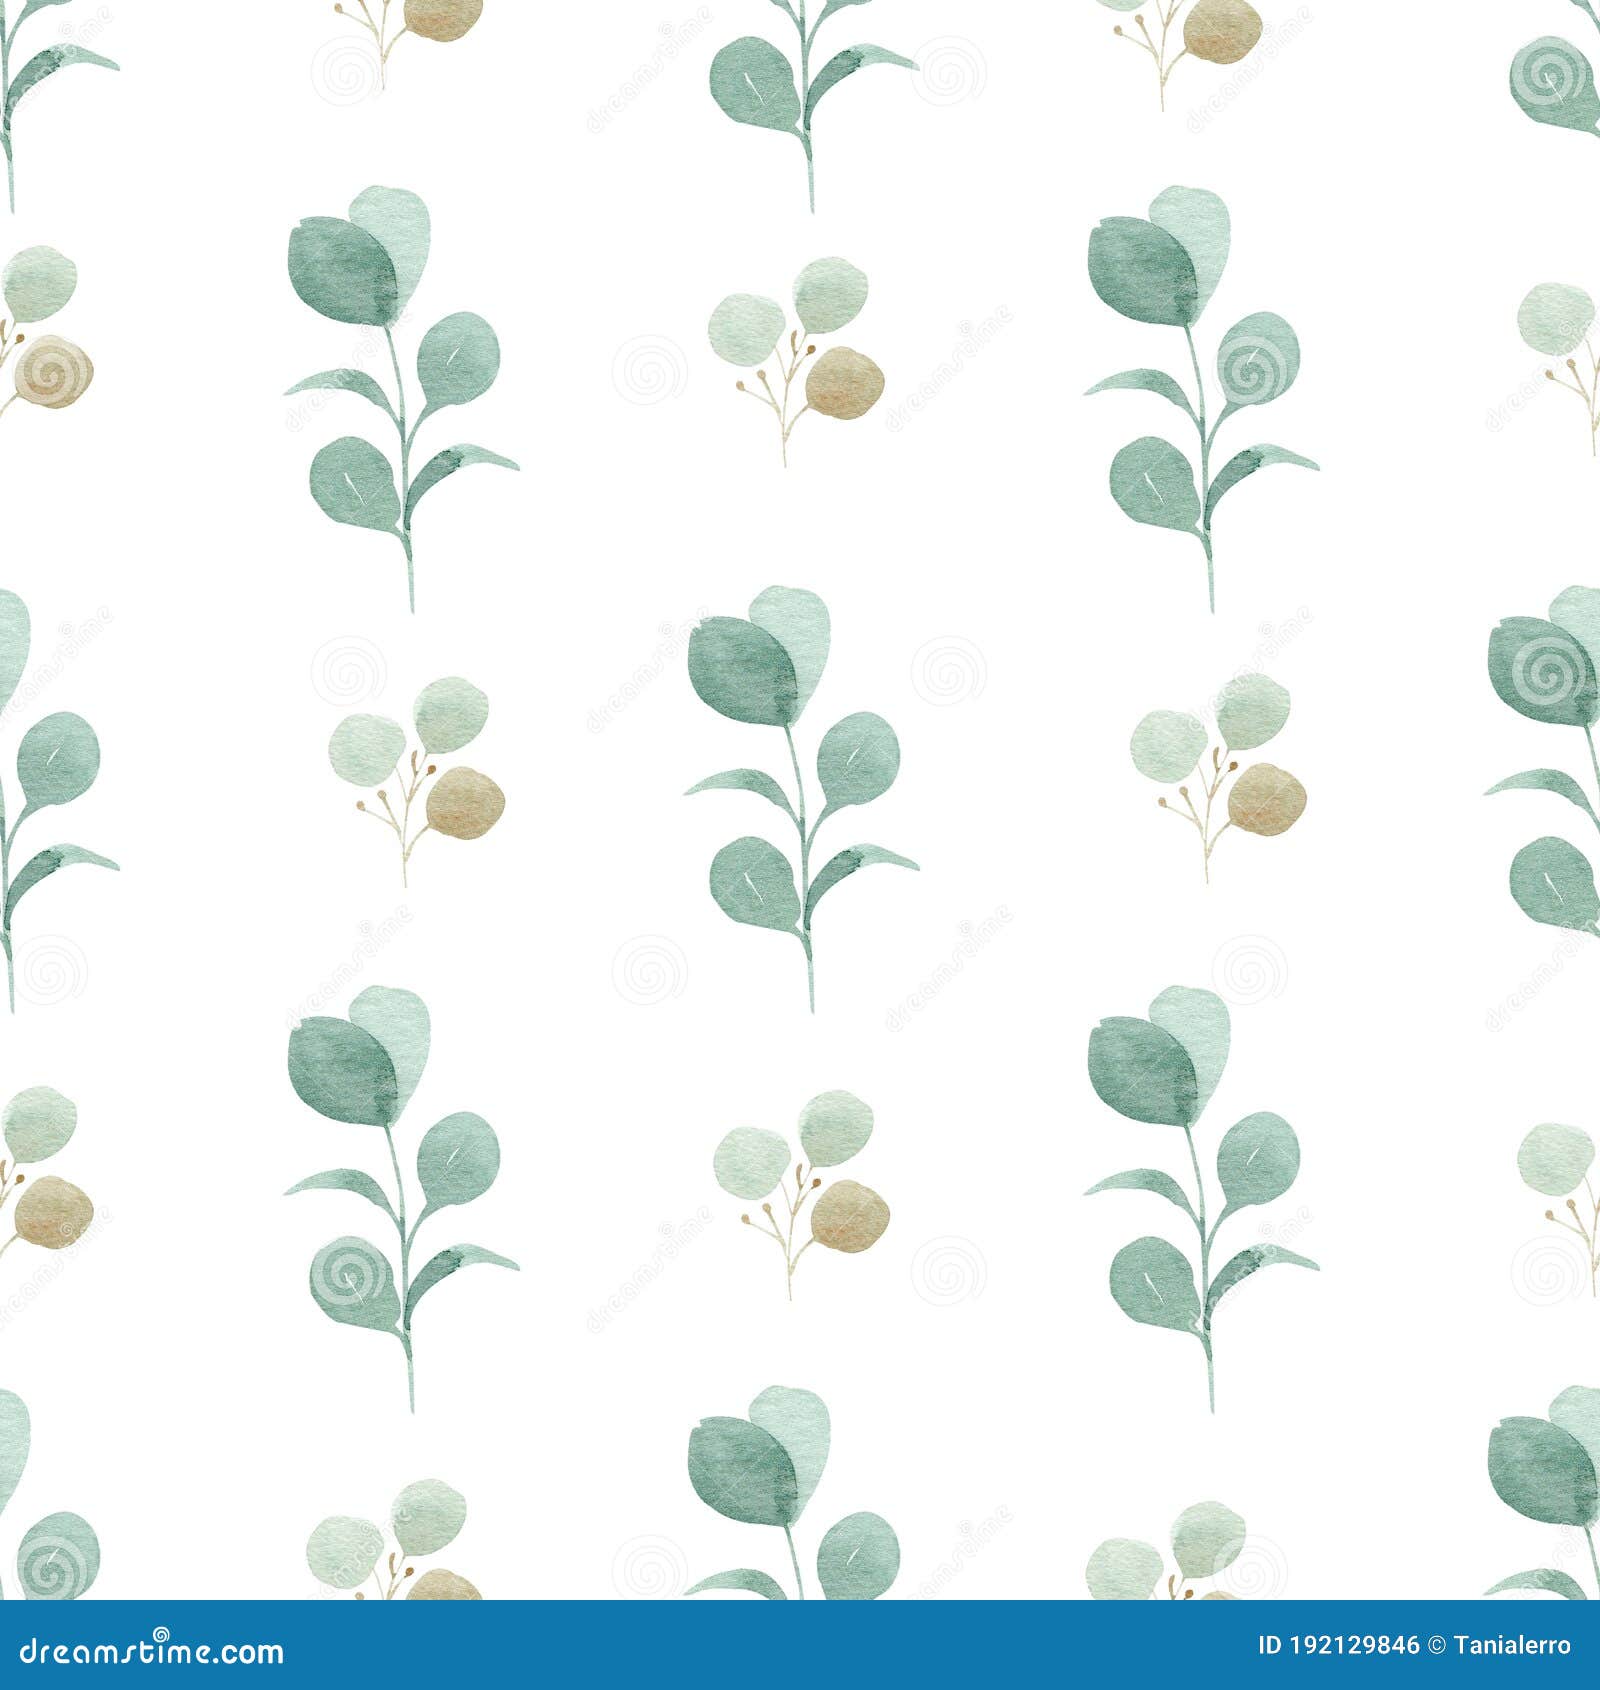 Repeat pattern Leaves Fabric Floral background Watercolor greenery digital paper Eucalyptus and cotton seamless pattern PNG